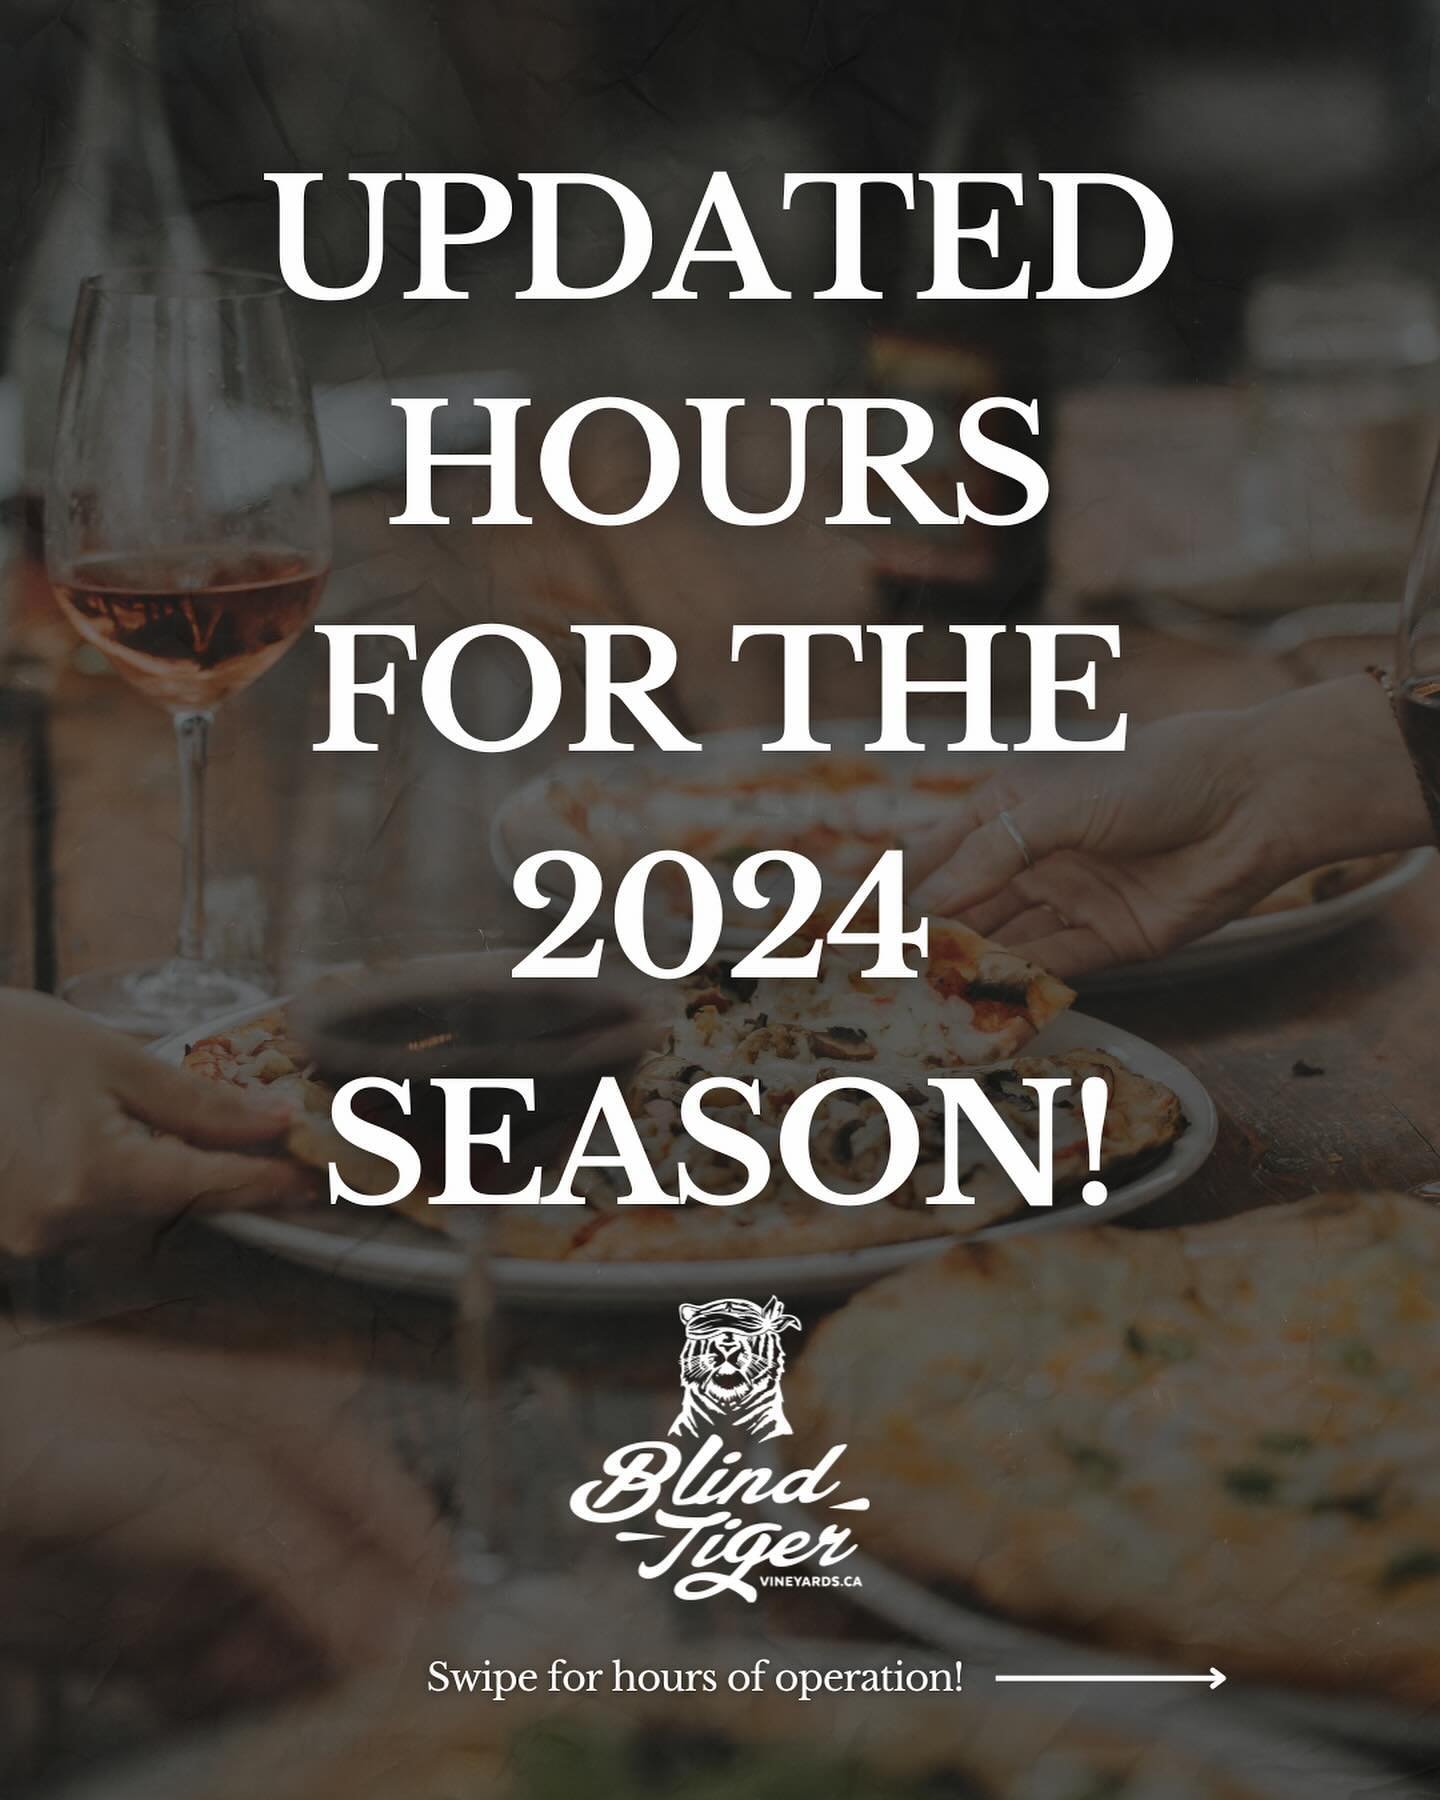 Today is the day we are updating our hours to accommodate our Live in the Vineyard concert series! Our regular operating hours for Fridays and Saturdays will be 12:00 pm - 4:00 pm! 🤗

Live in the Vineyard doors will open at 6:00 pm with the show beg